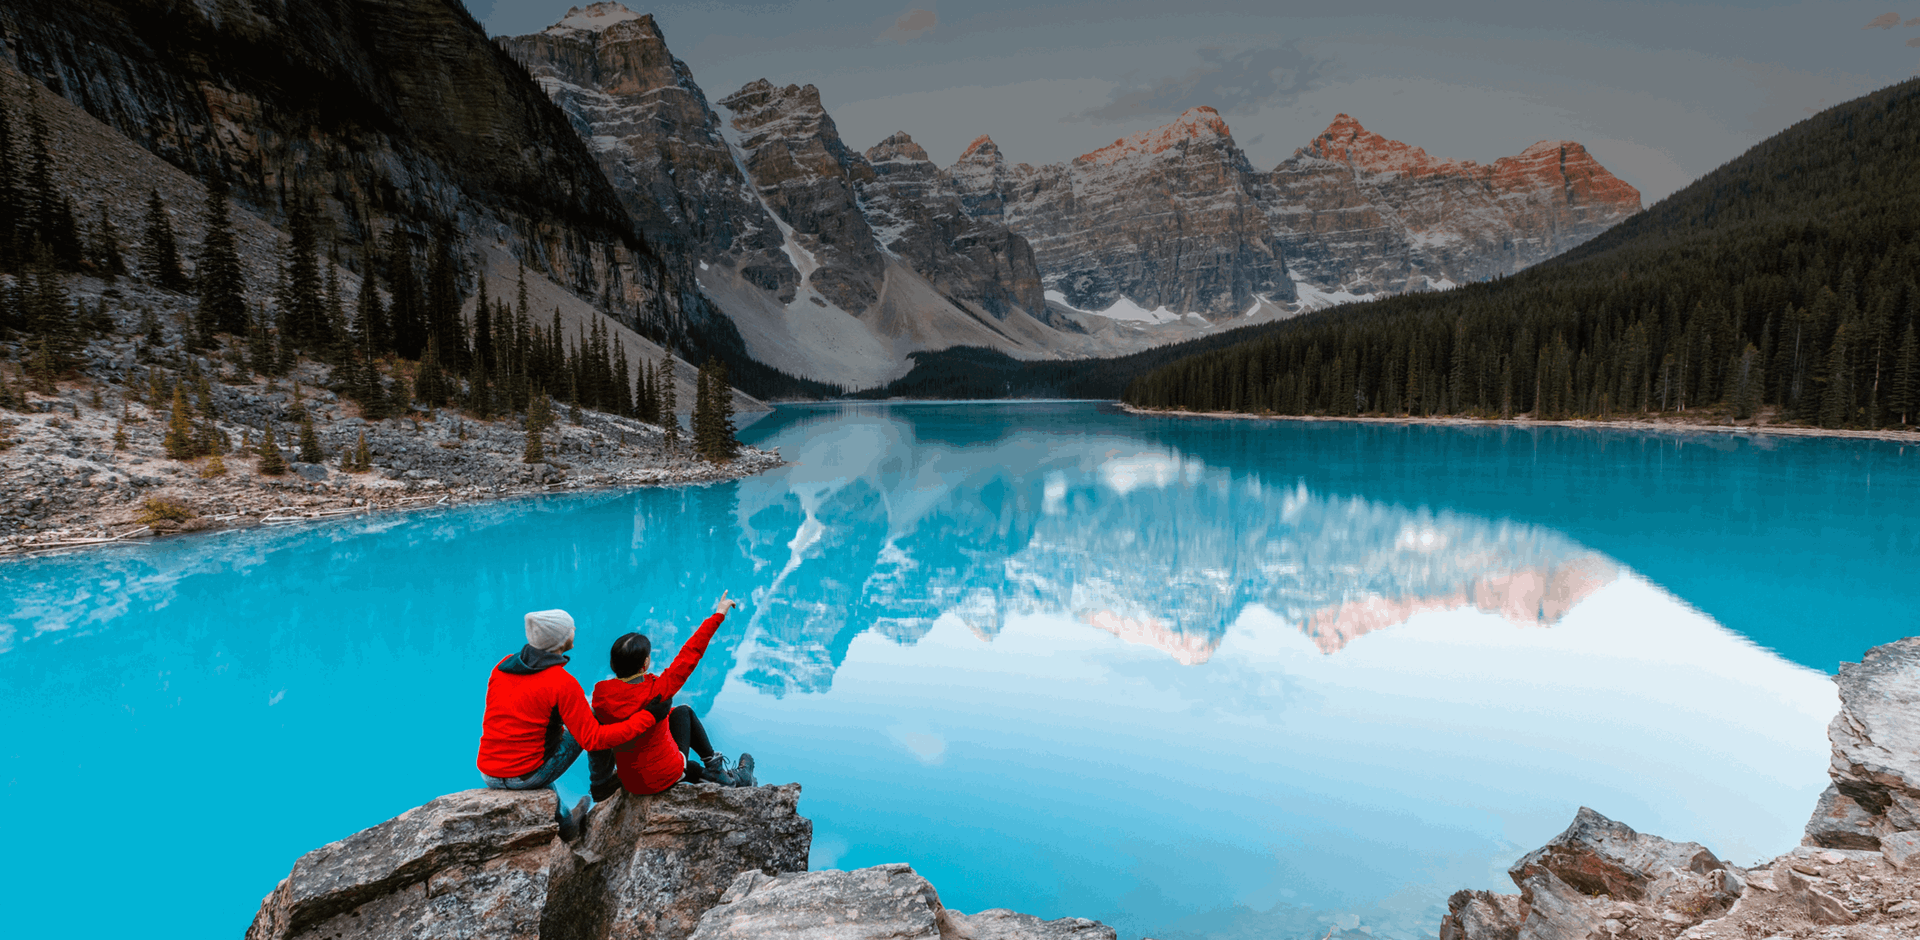 Couple looking at piercing blue Moraine lake and mountains, Banff, Alberta, Canada.